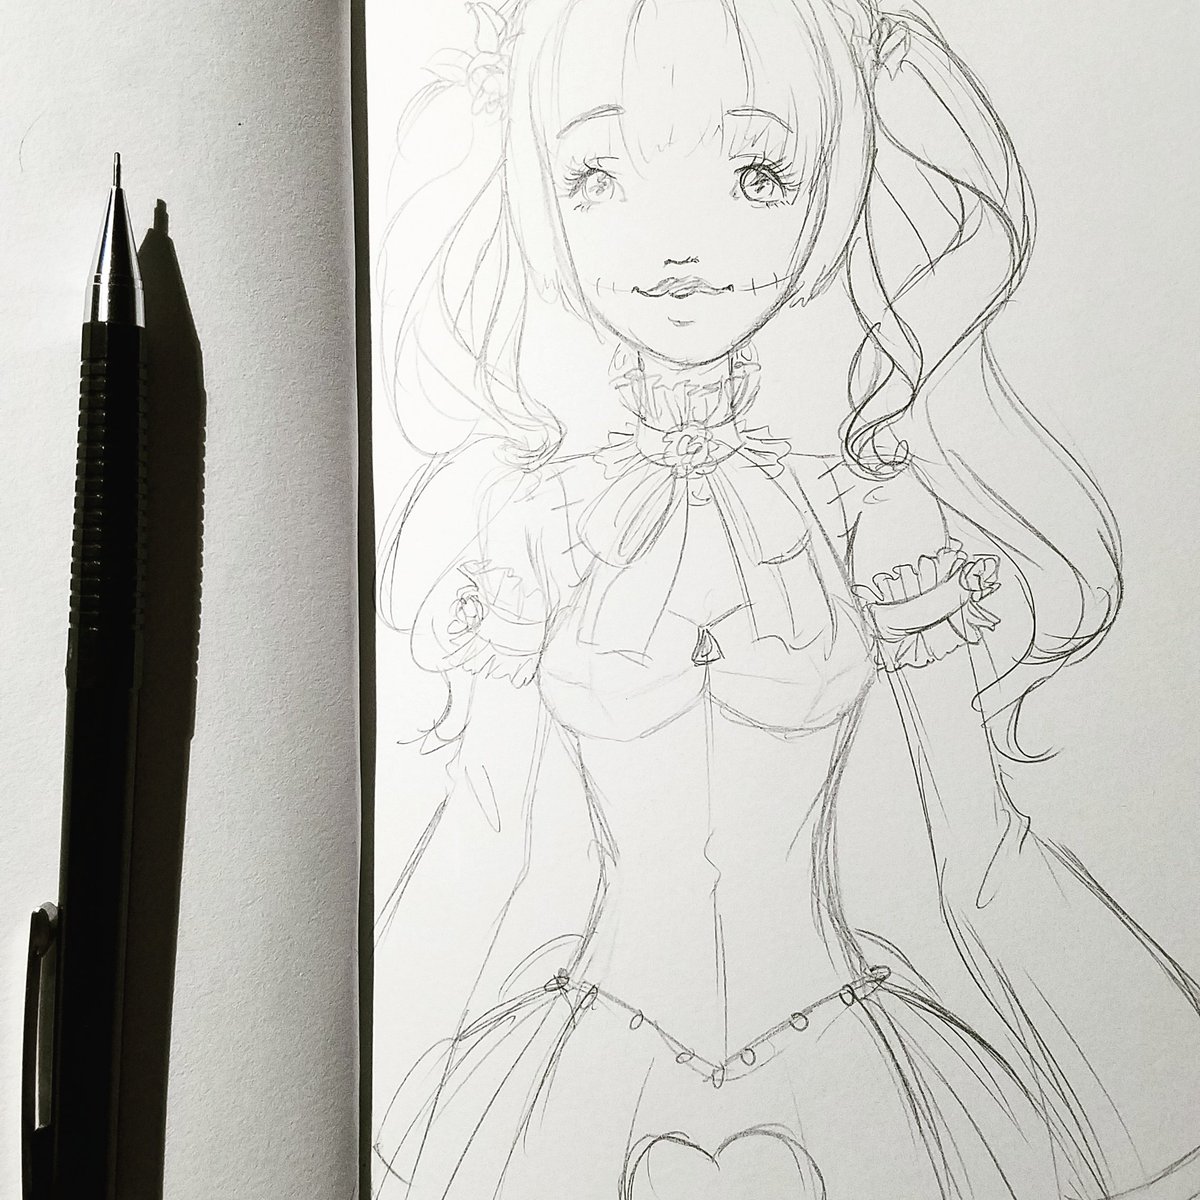 #sketch #freehand #noguidelines #MaidRPG #Cupcake #sexylolitatype #patchedskin #redesign